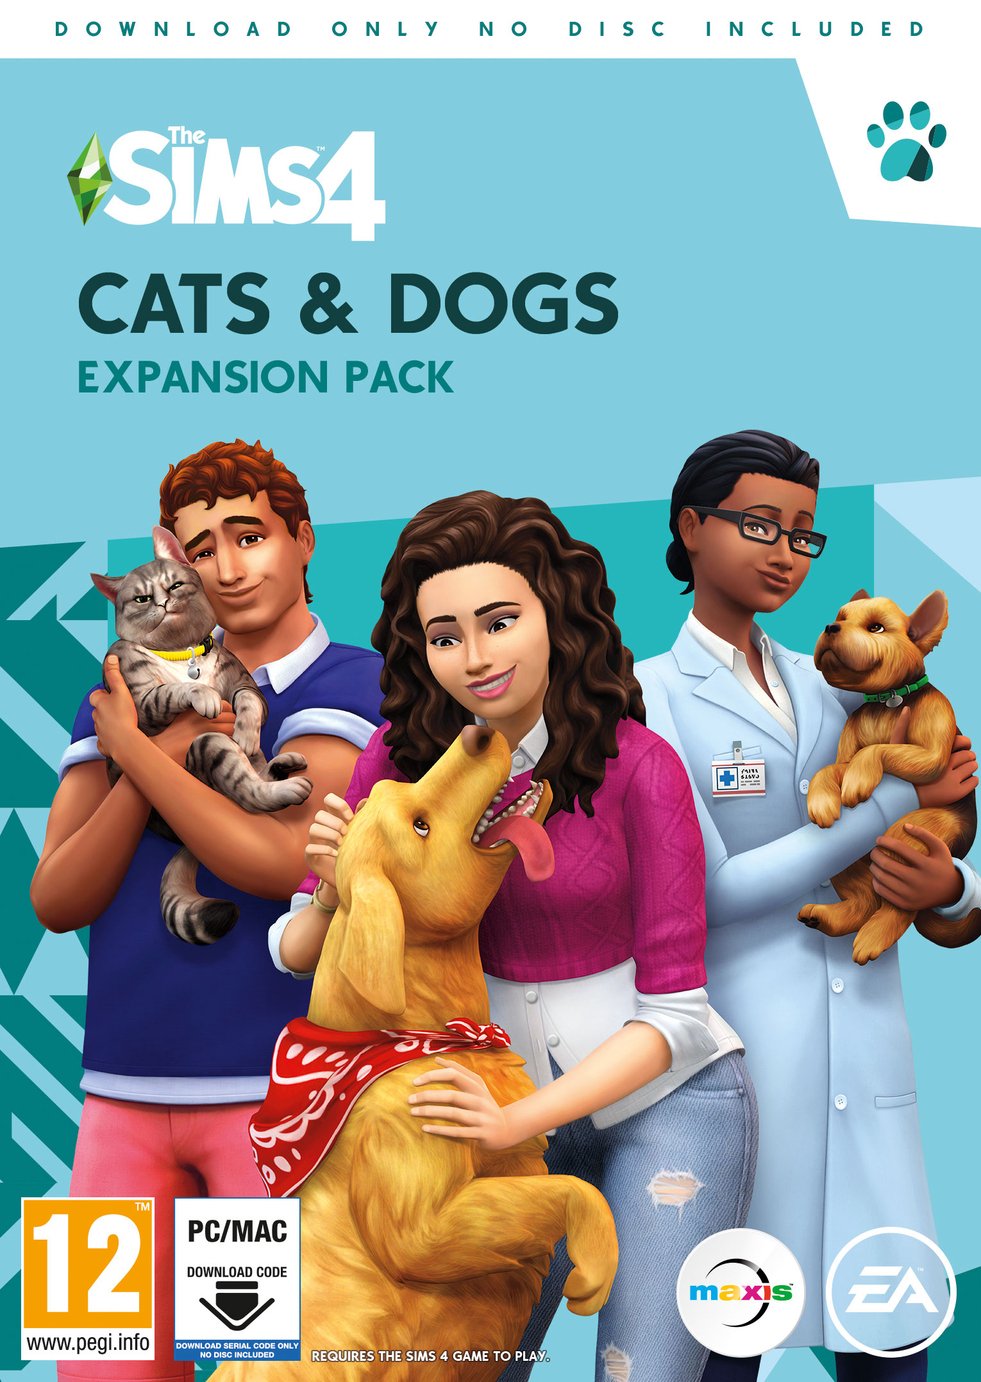 The Sims 4 Cats & Dogs Expansion Pack PC Game Review